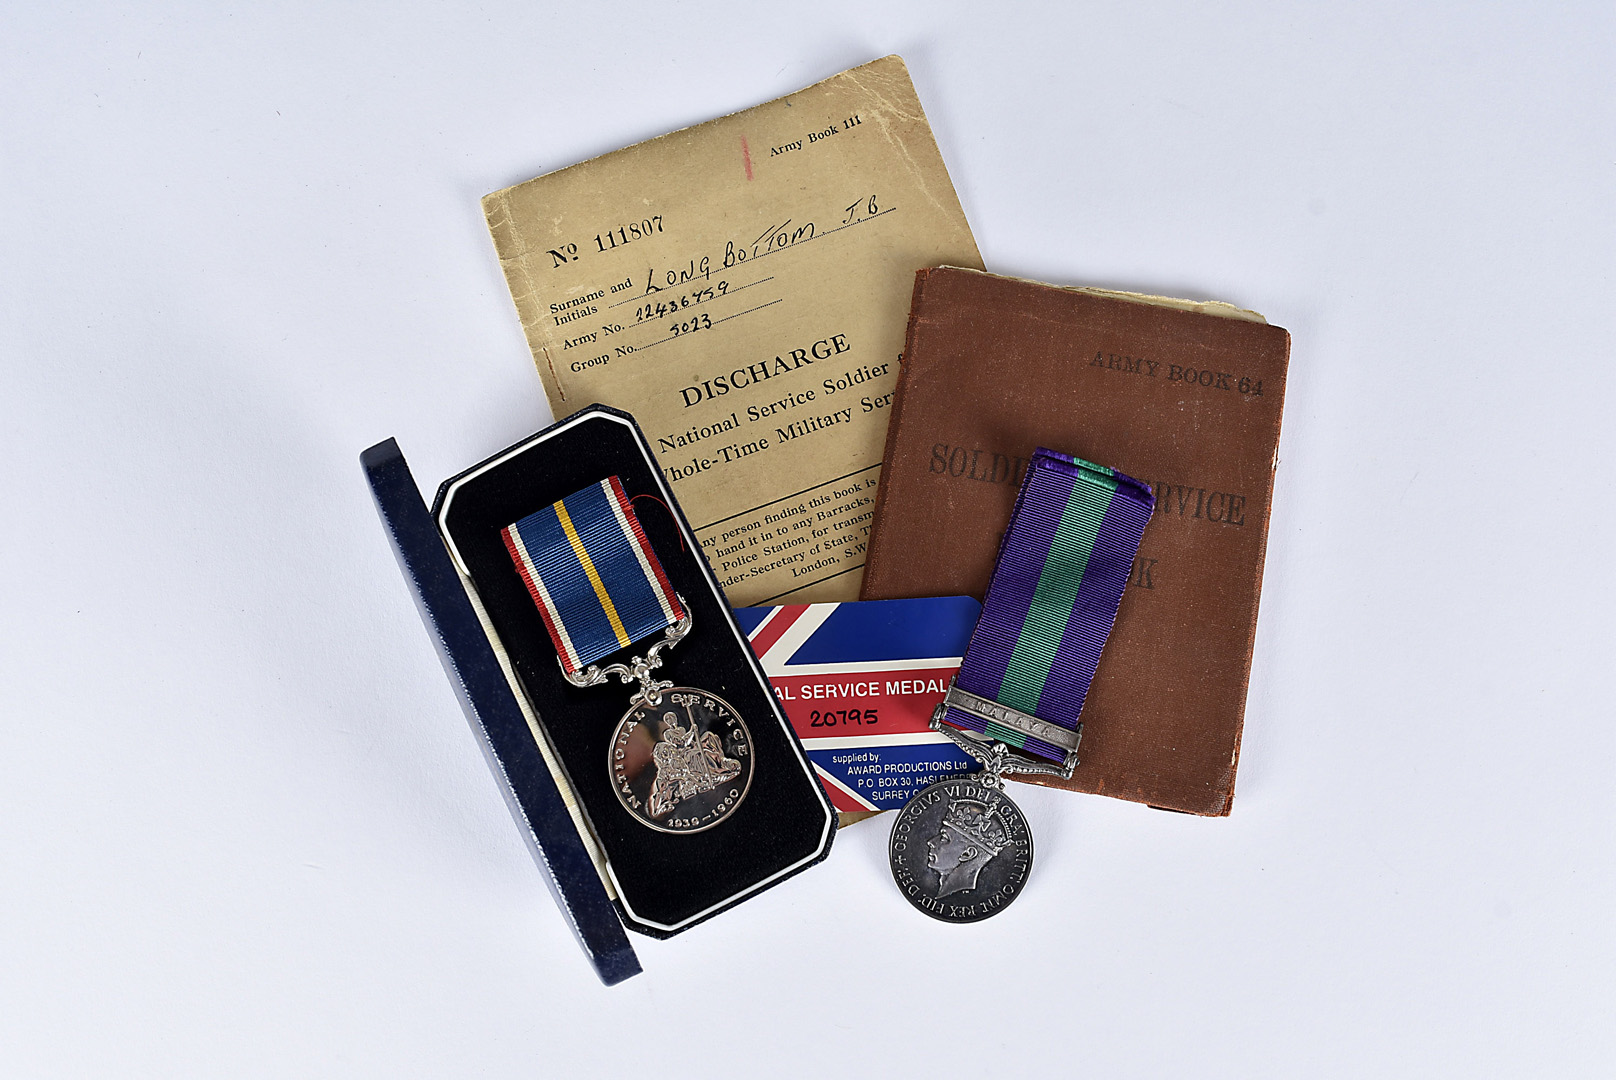 A Royal Signals General Service medal 1918-62, with Malaya clasp, awarded to 22436759 SIGMN.J.B.